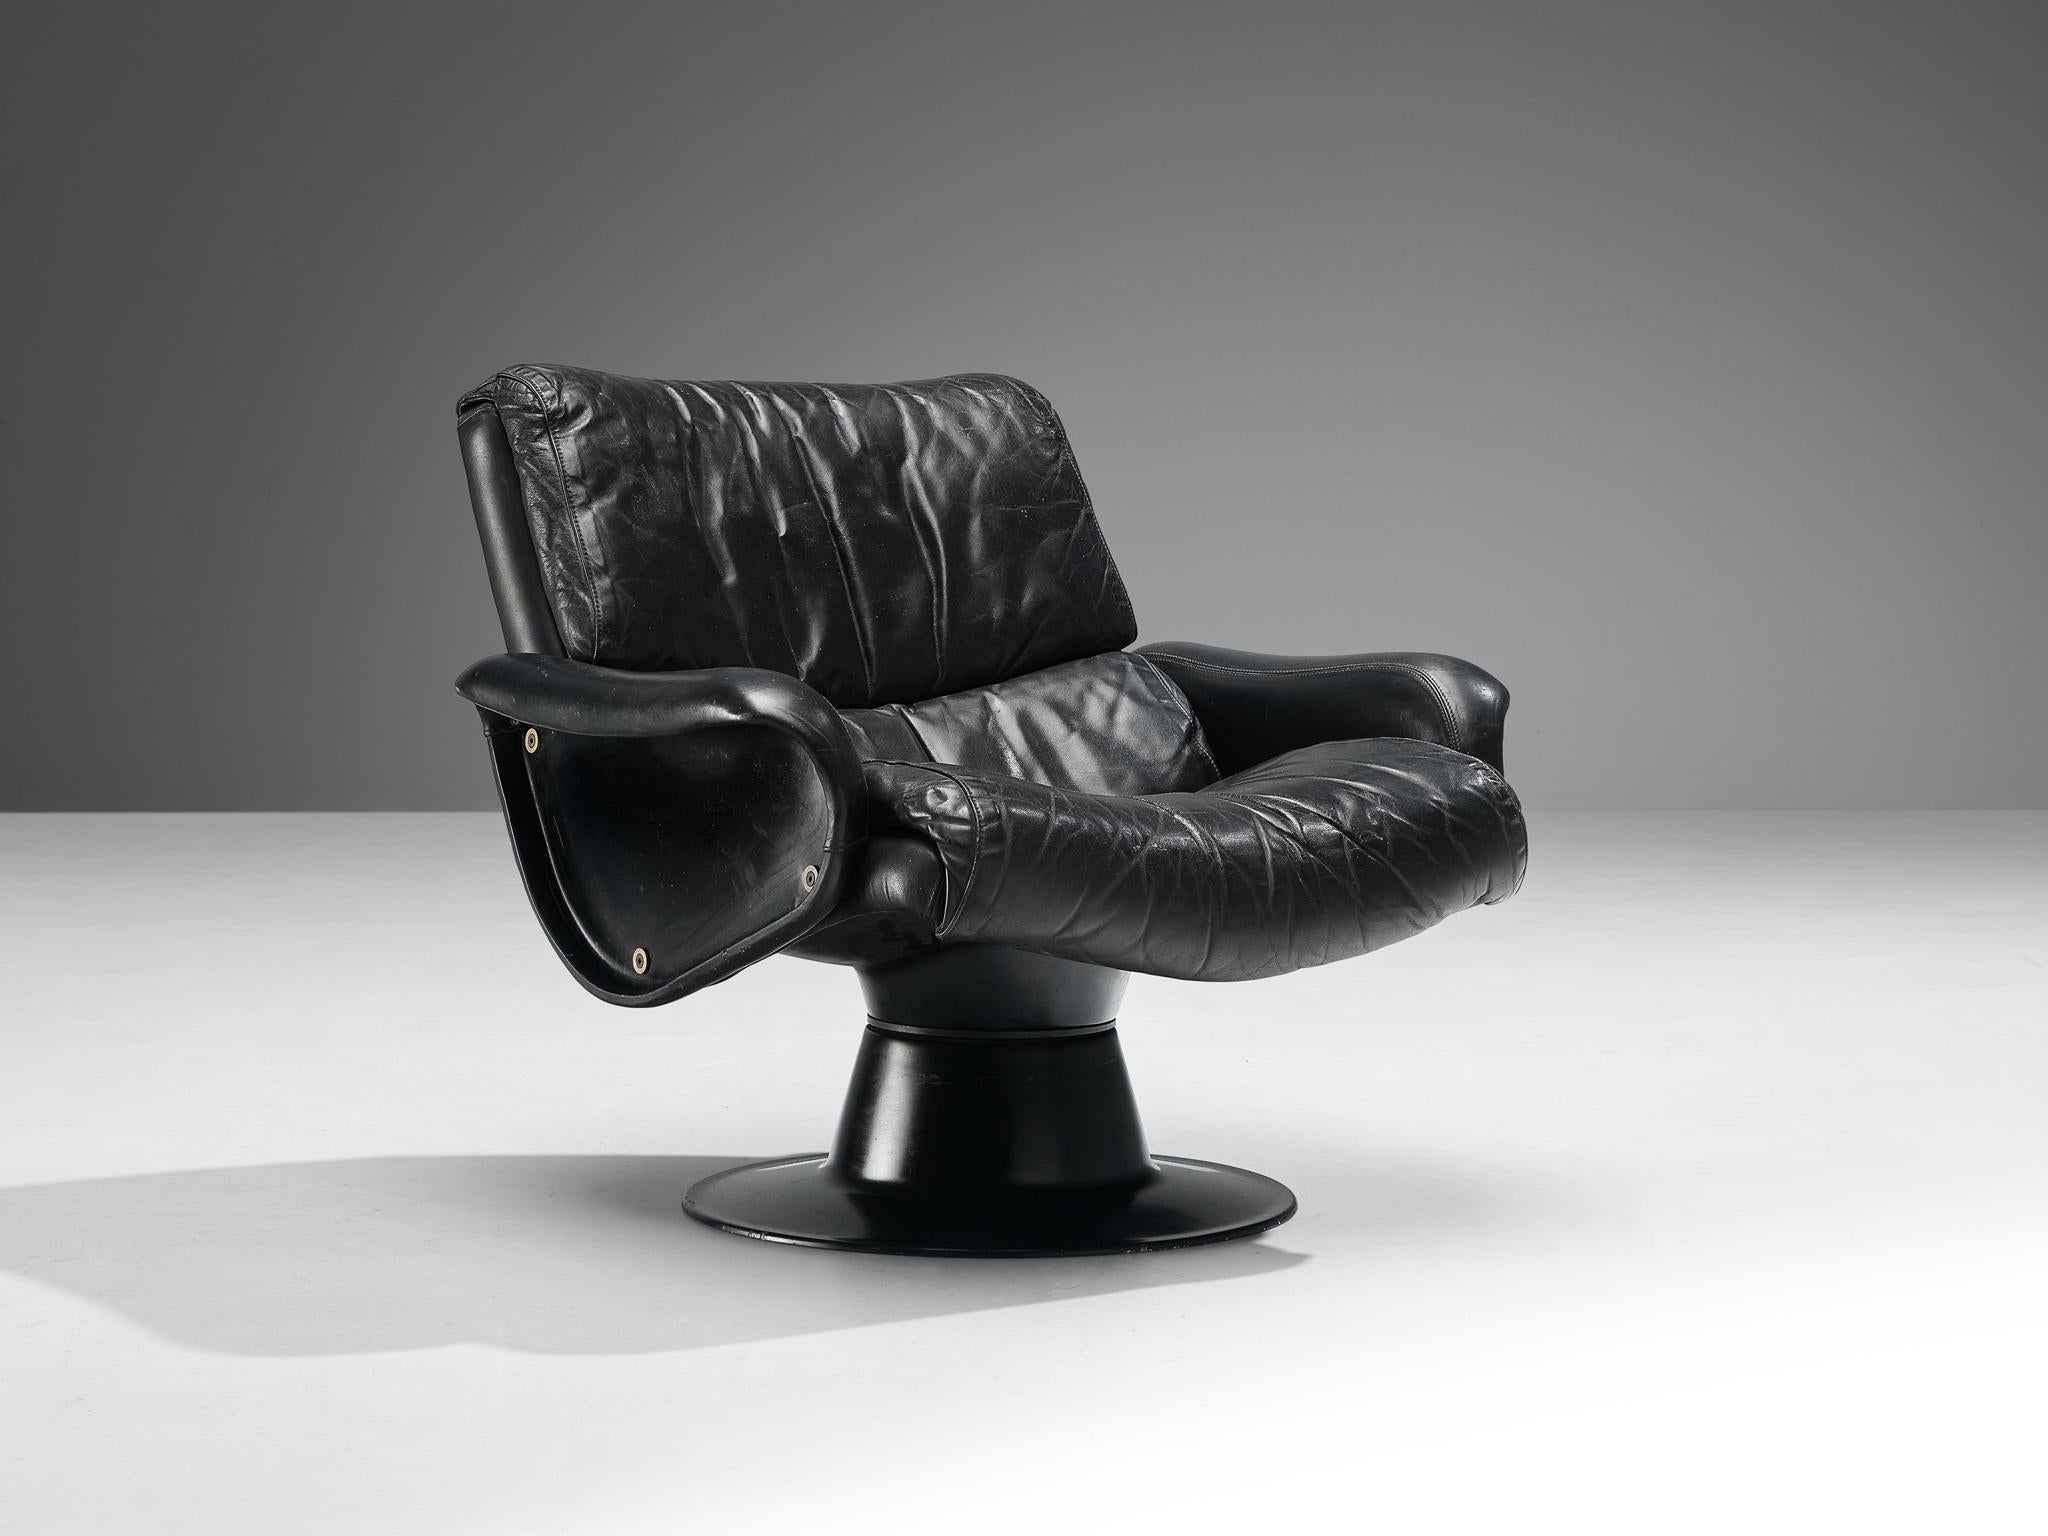 Yrjö Kukkapuro for Haimi, 'Saturnus' lounge chair, leather, fiberglass, Finland, 1960s.

Stunning easy chair in patinated black leather and fiberglass by Finnish designer Yrjö Kukkapuro. This organic shaped chair is made in a moulded fiberglass